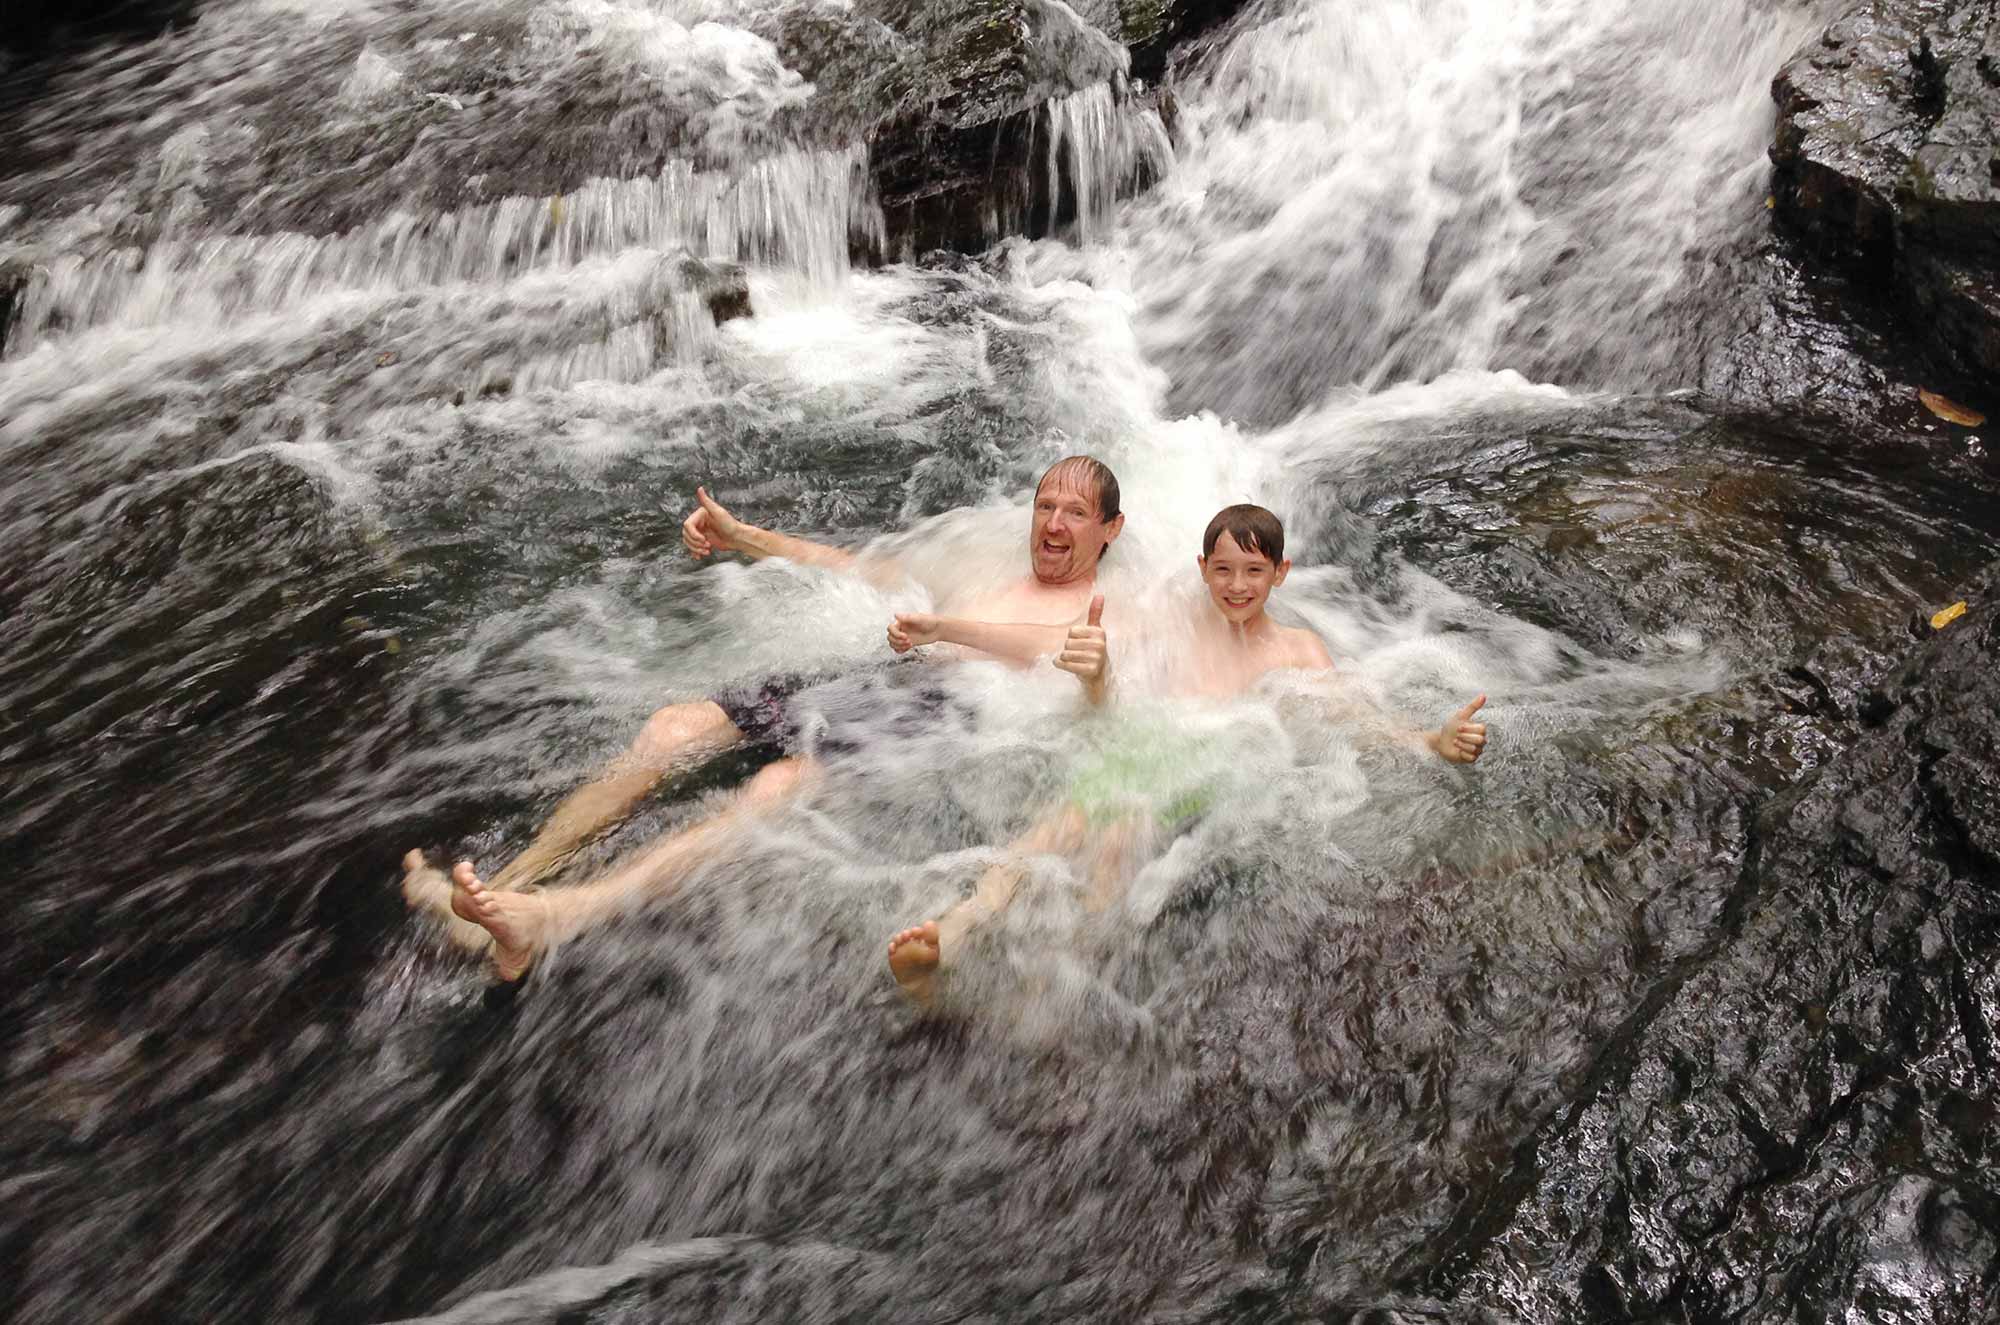 Playing in the rivers of Baru Costa Rica